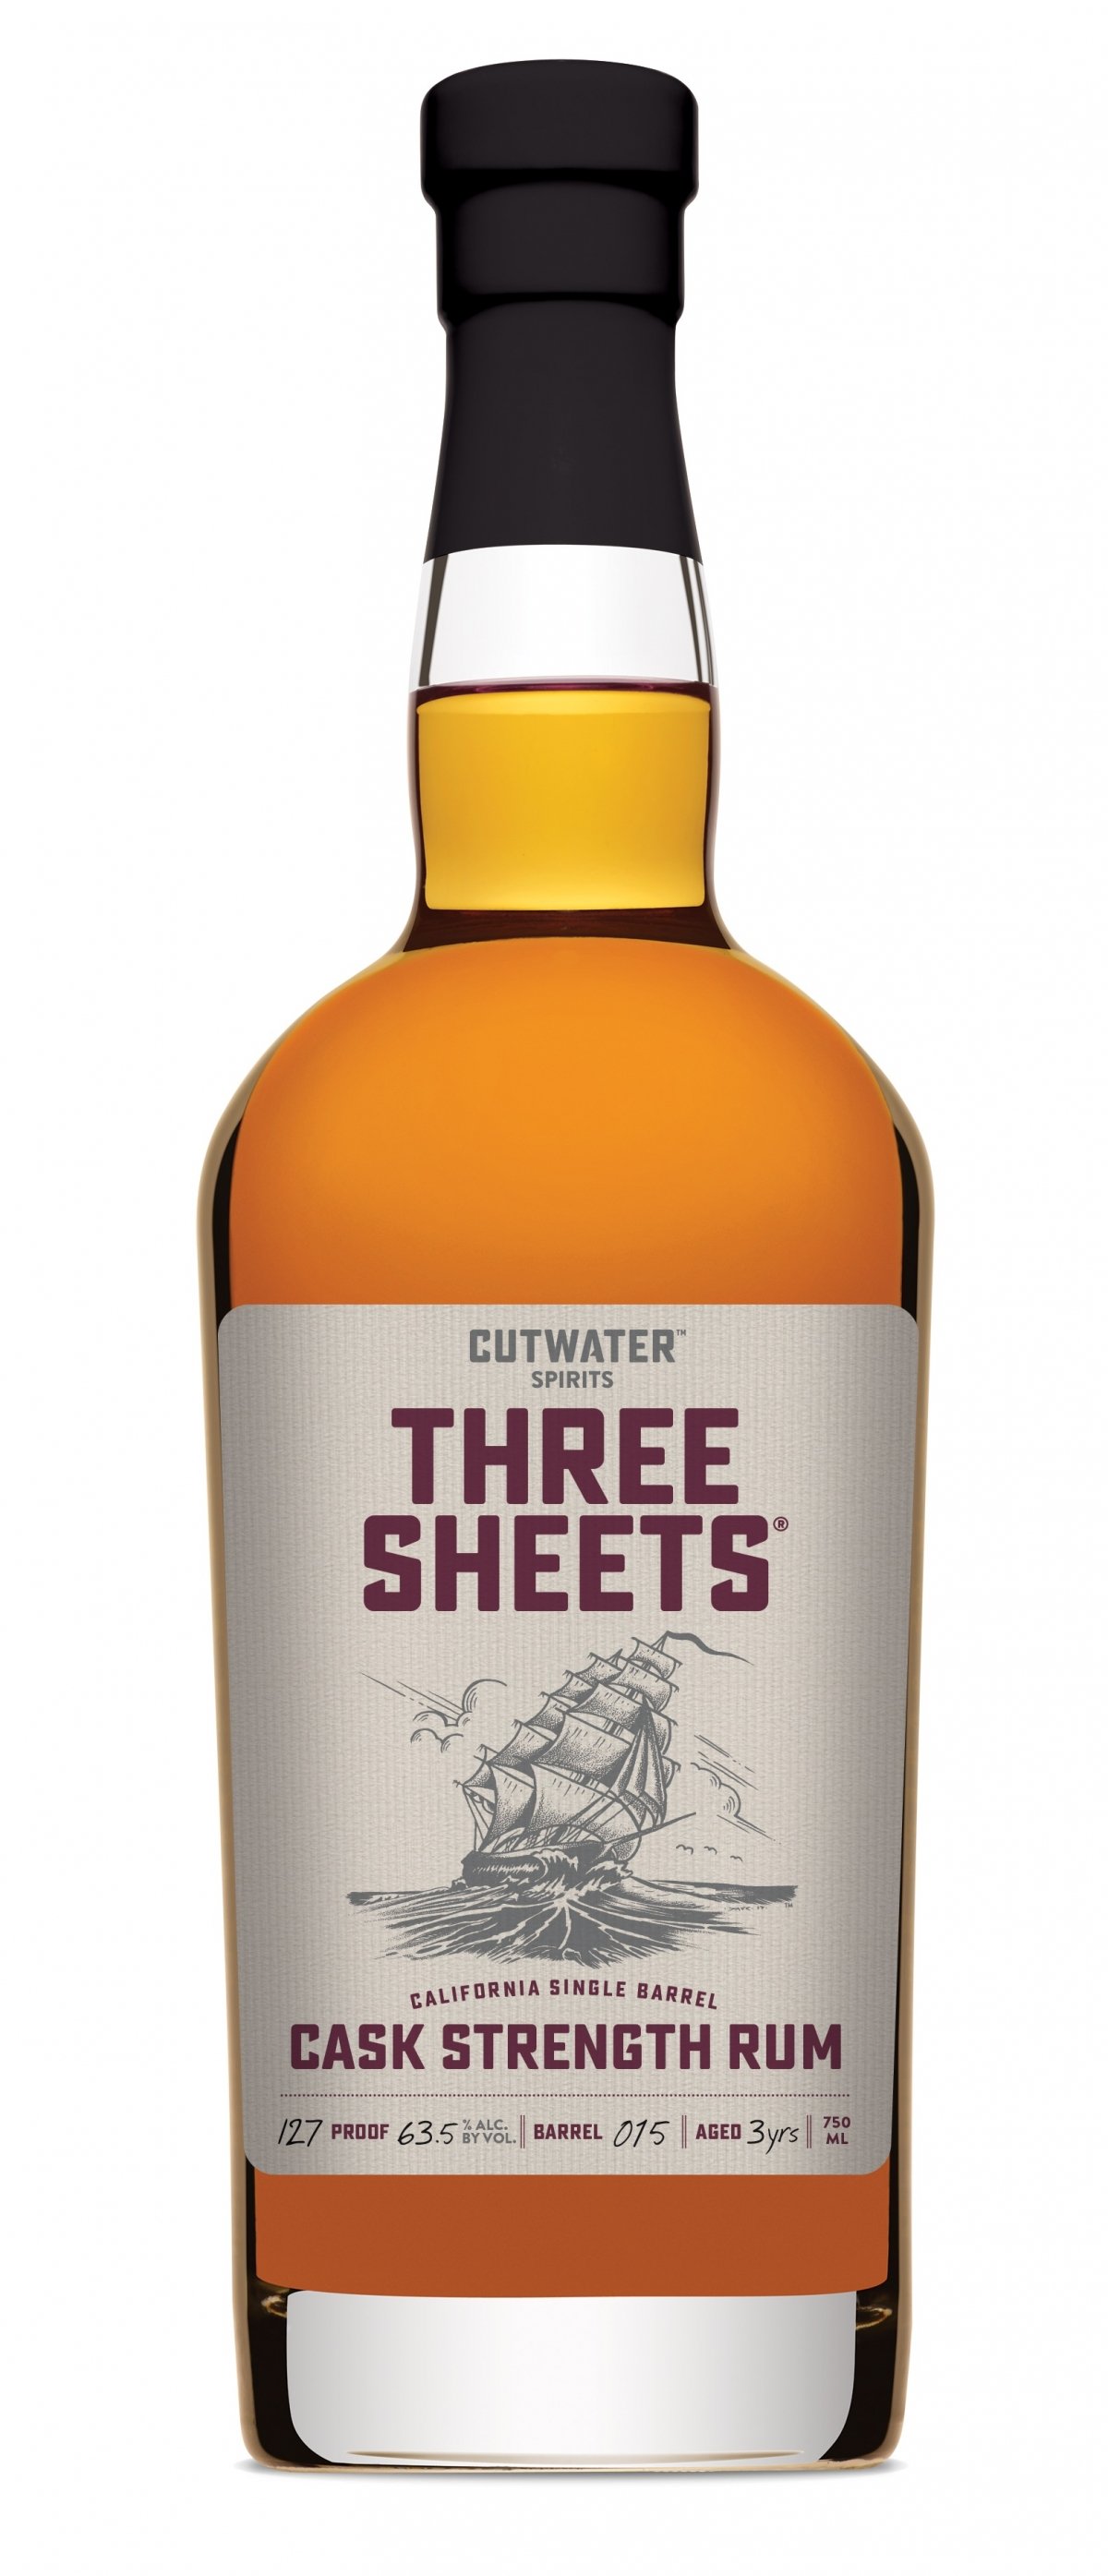 Ron Cutwater Three Sheets Cask Strength Rum